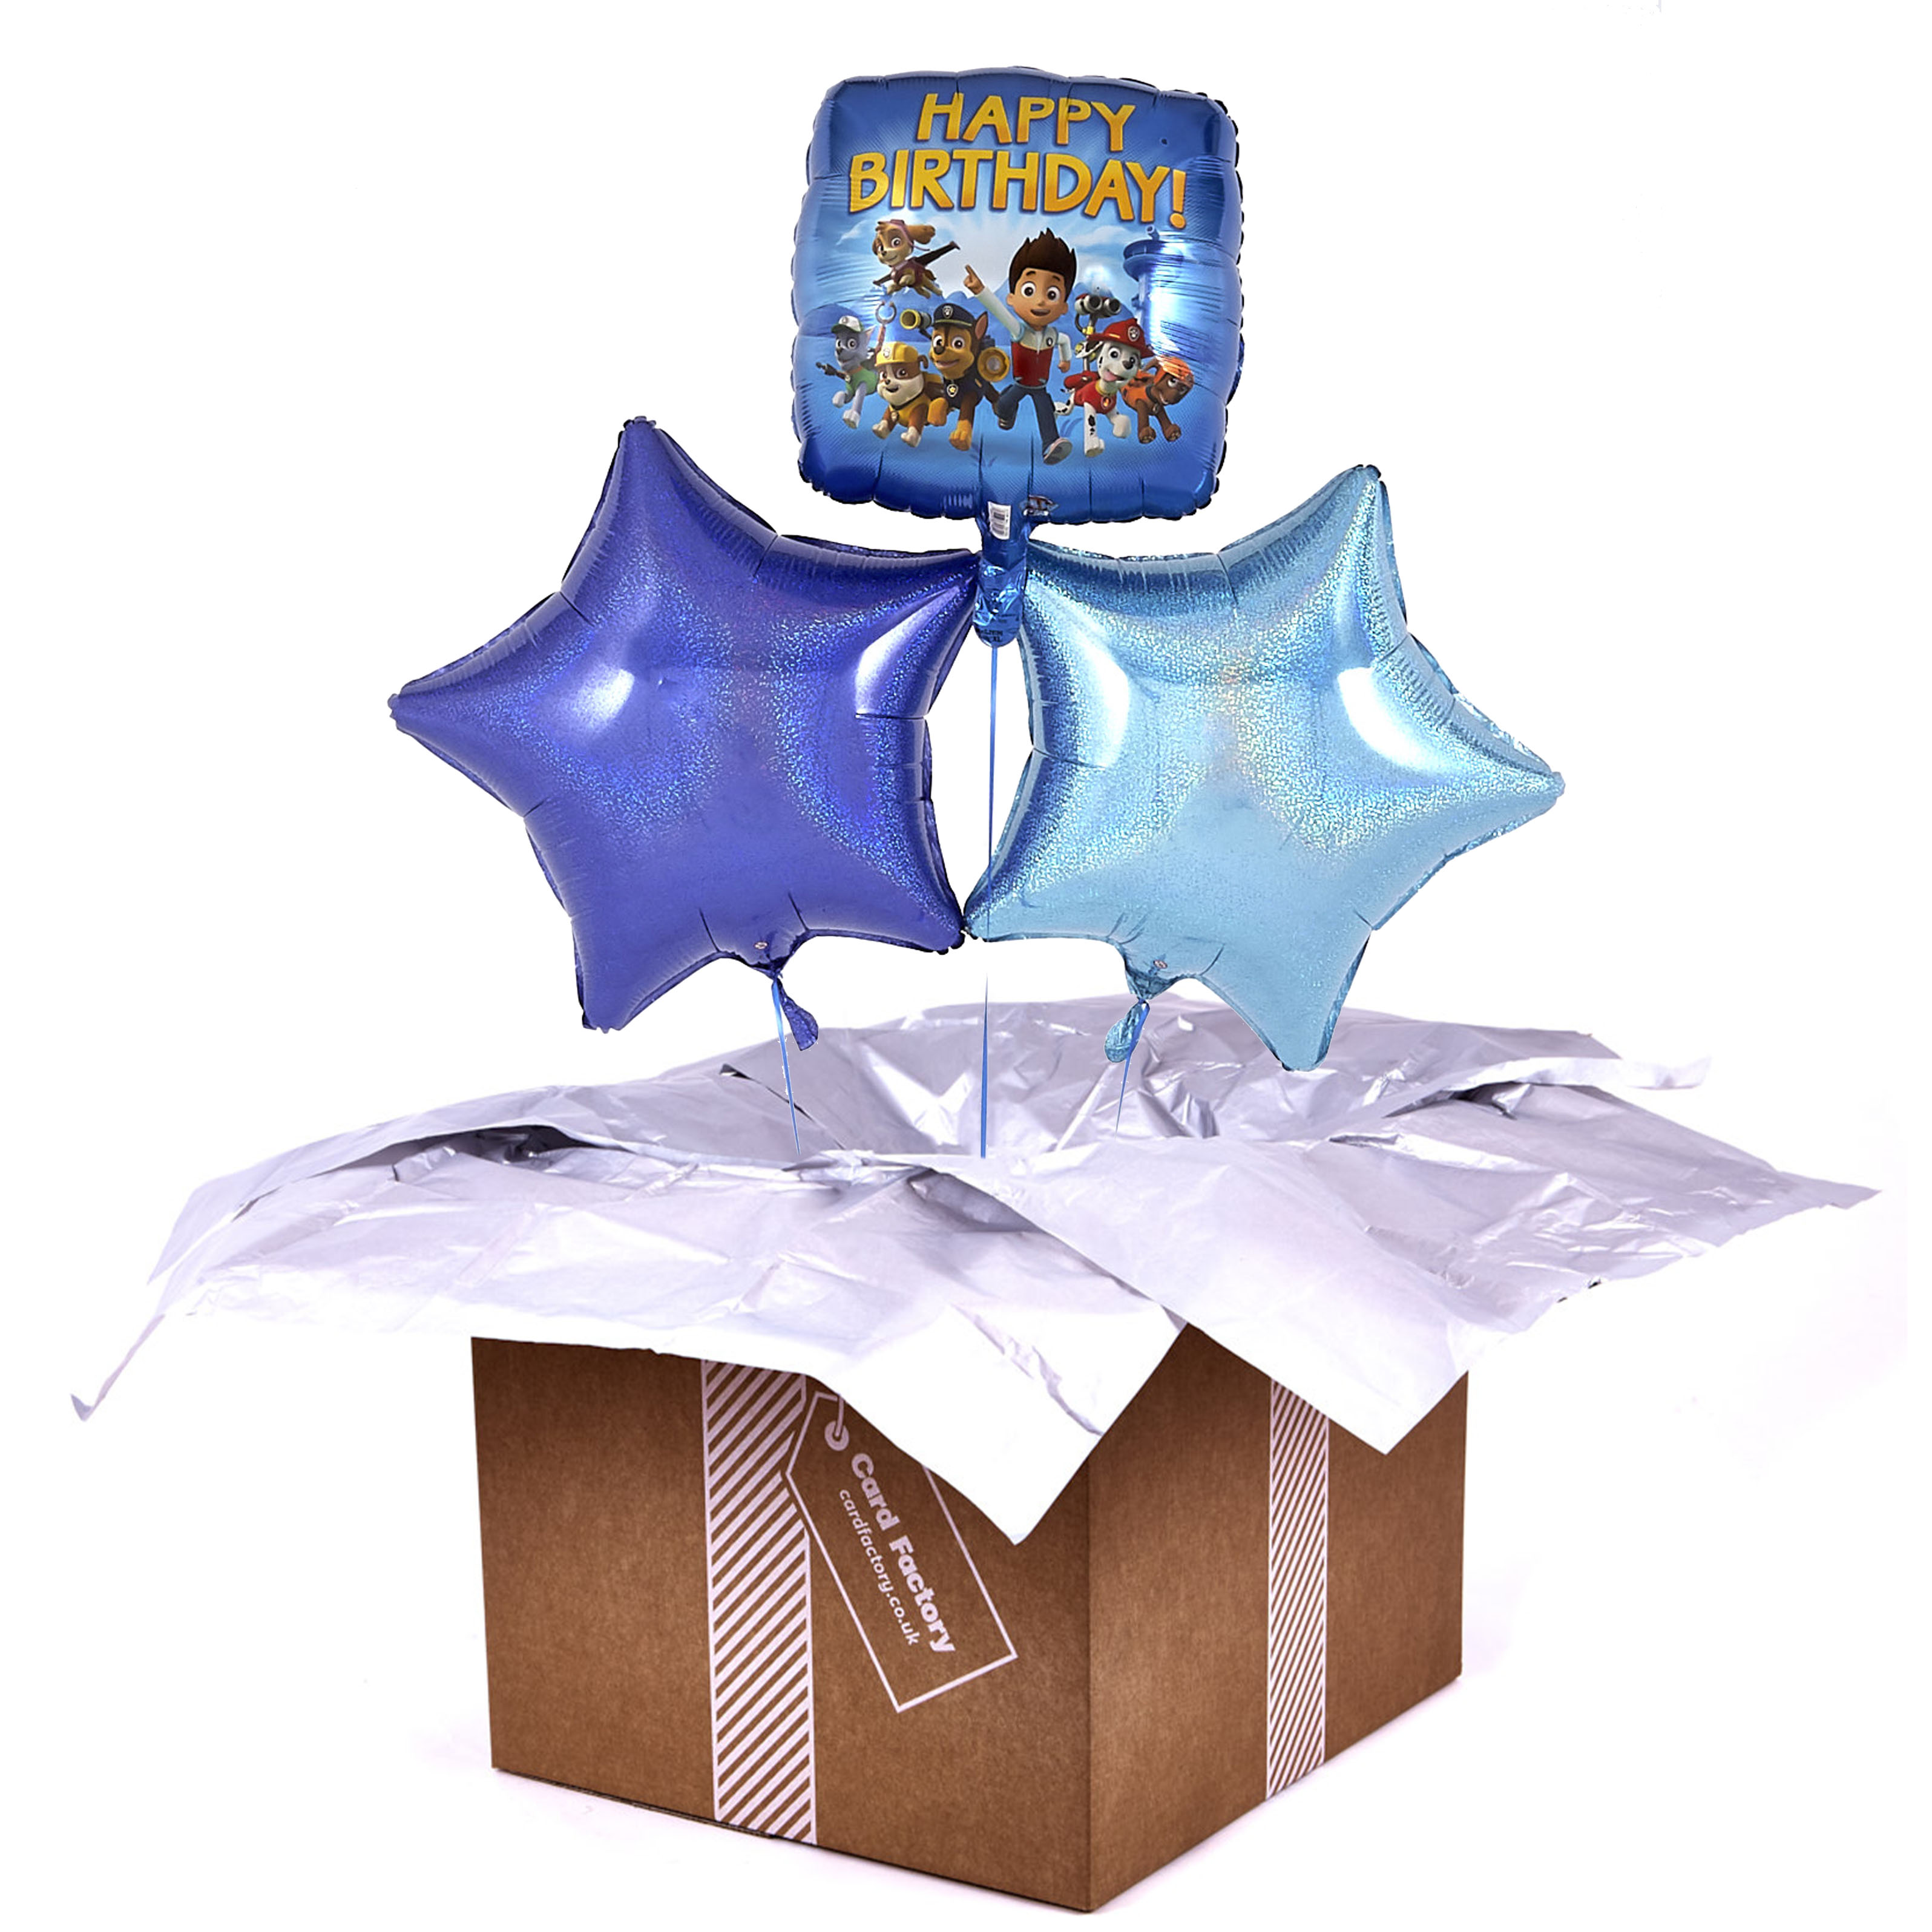 Paw Patrol Happy Birthday Blue Balloon Bouquet - DELIVERED INFLATED!